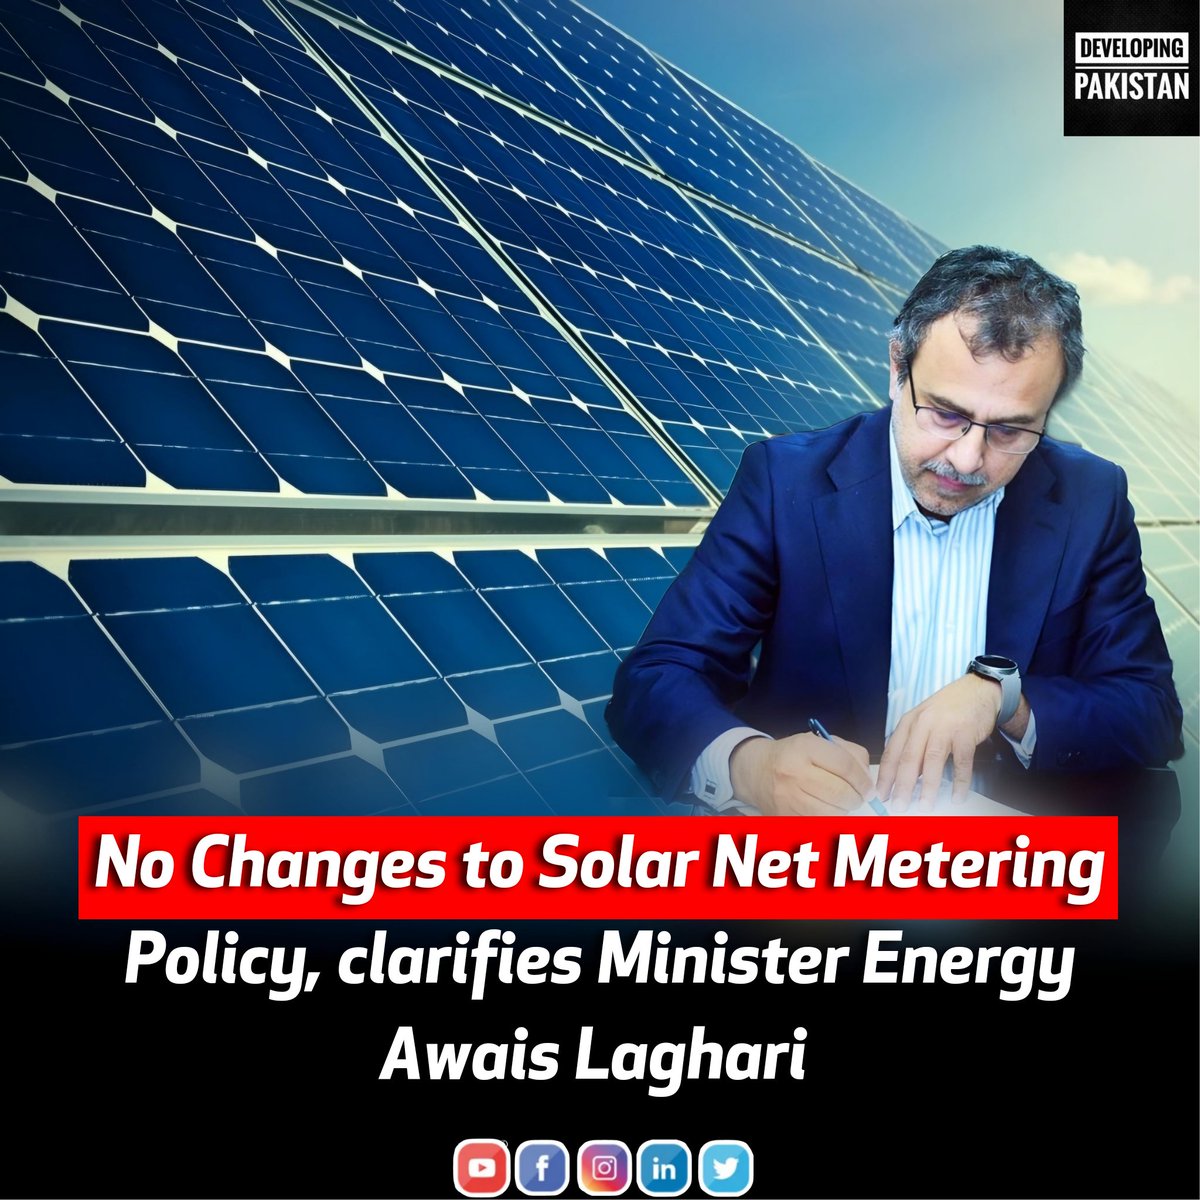 Minister for Energy Owais Leghari has addressed concerns about the solar net metering policy, reassuring that the current framework remains intact and no alterations are being planned.

#solarsystem #solarpanels #solarinstallation #Pakistan #NetMetering 🇵🇰🇵🇰